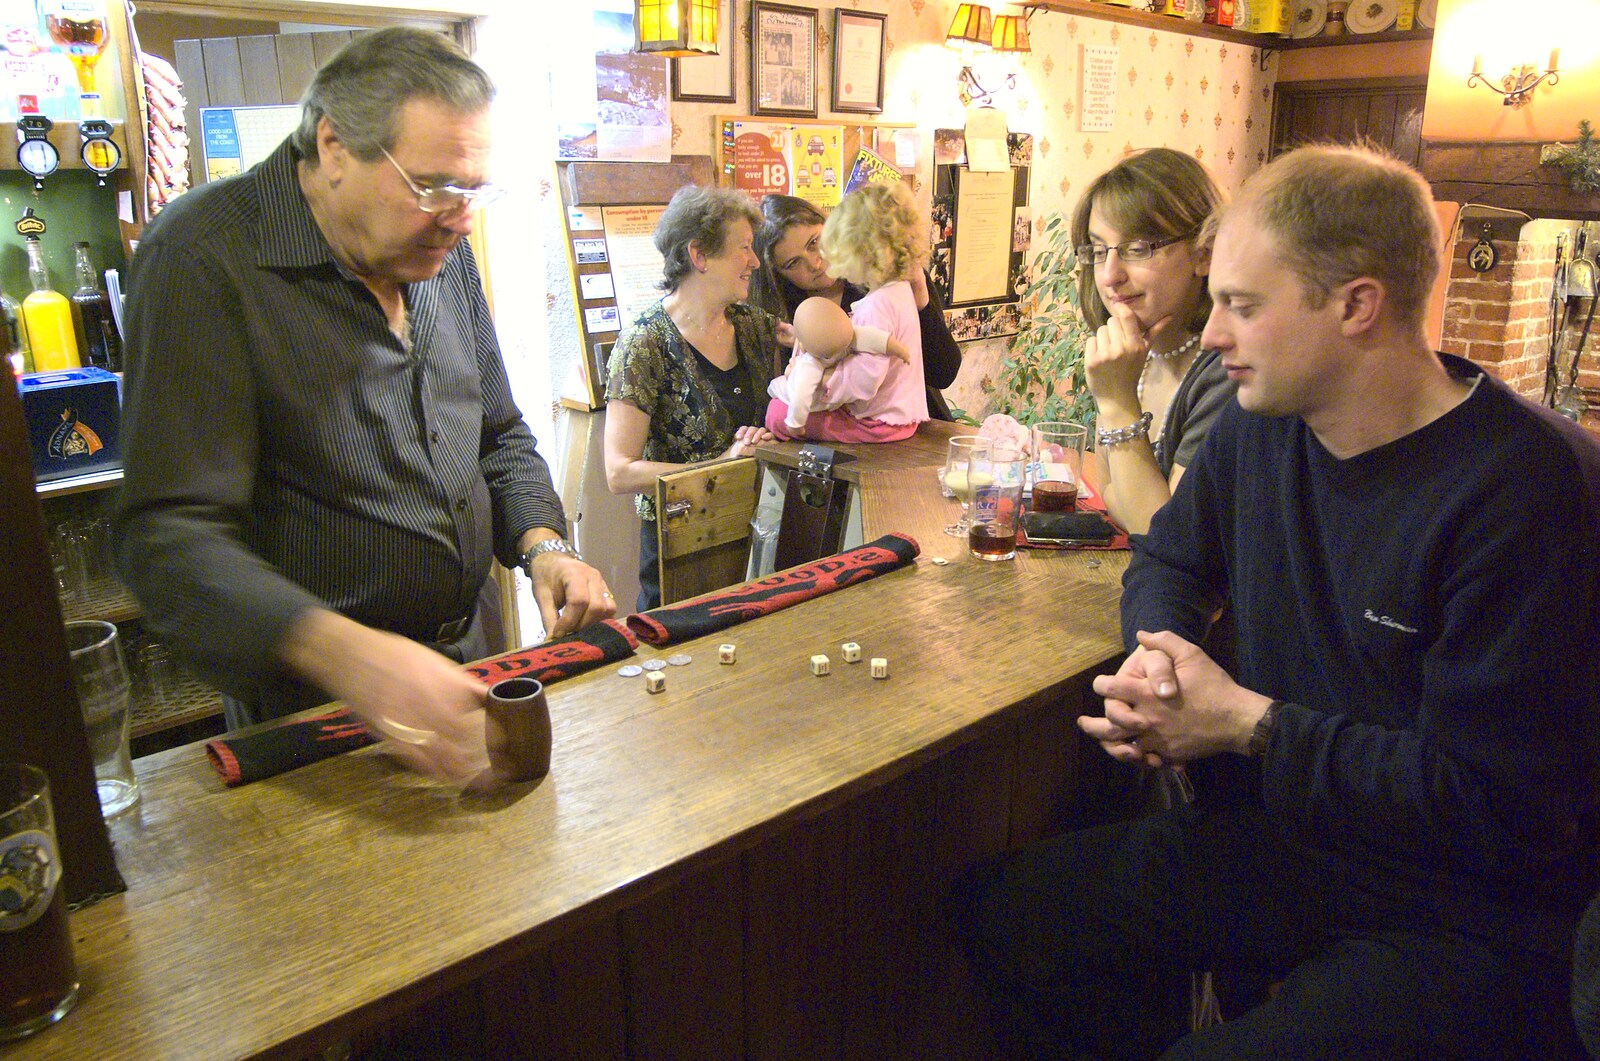 A game of 'Plonky Die' occurs from New Year's Eve at the Swan Inn, and Moonlight Photos, Brome, Suffolk - 31st December 2009